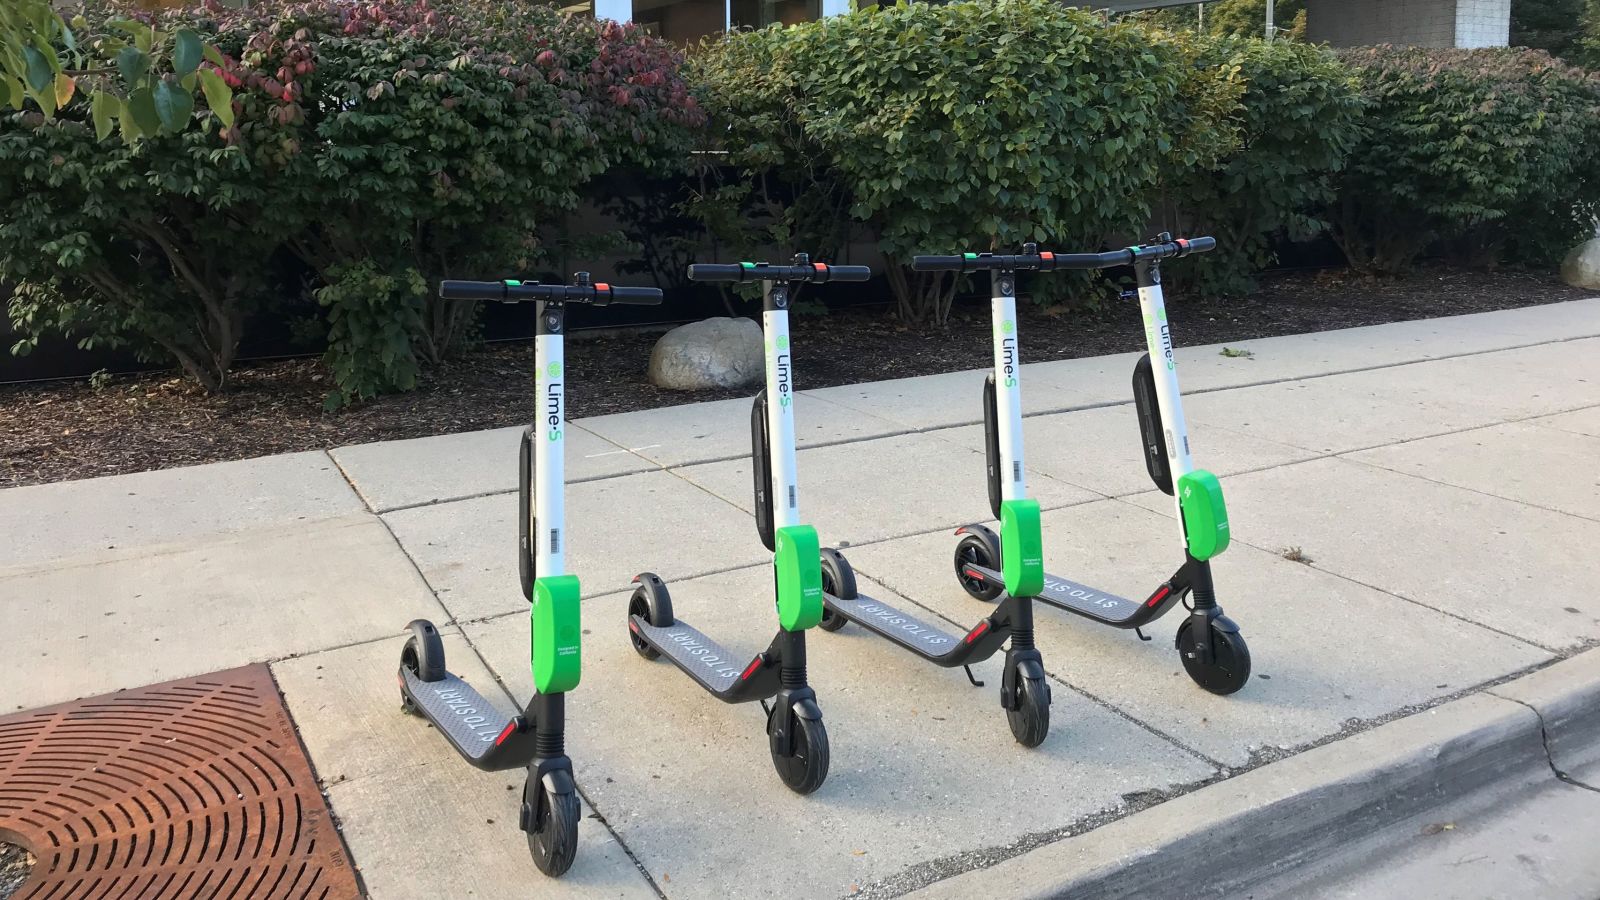 Illustration for article titled My mom is very annoyed by some Lime e-scooters parked in her neighborhood